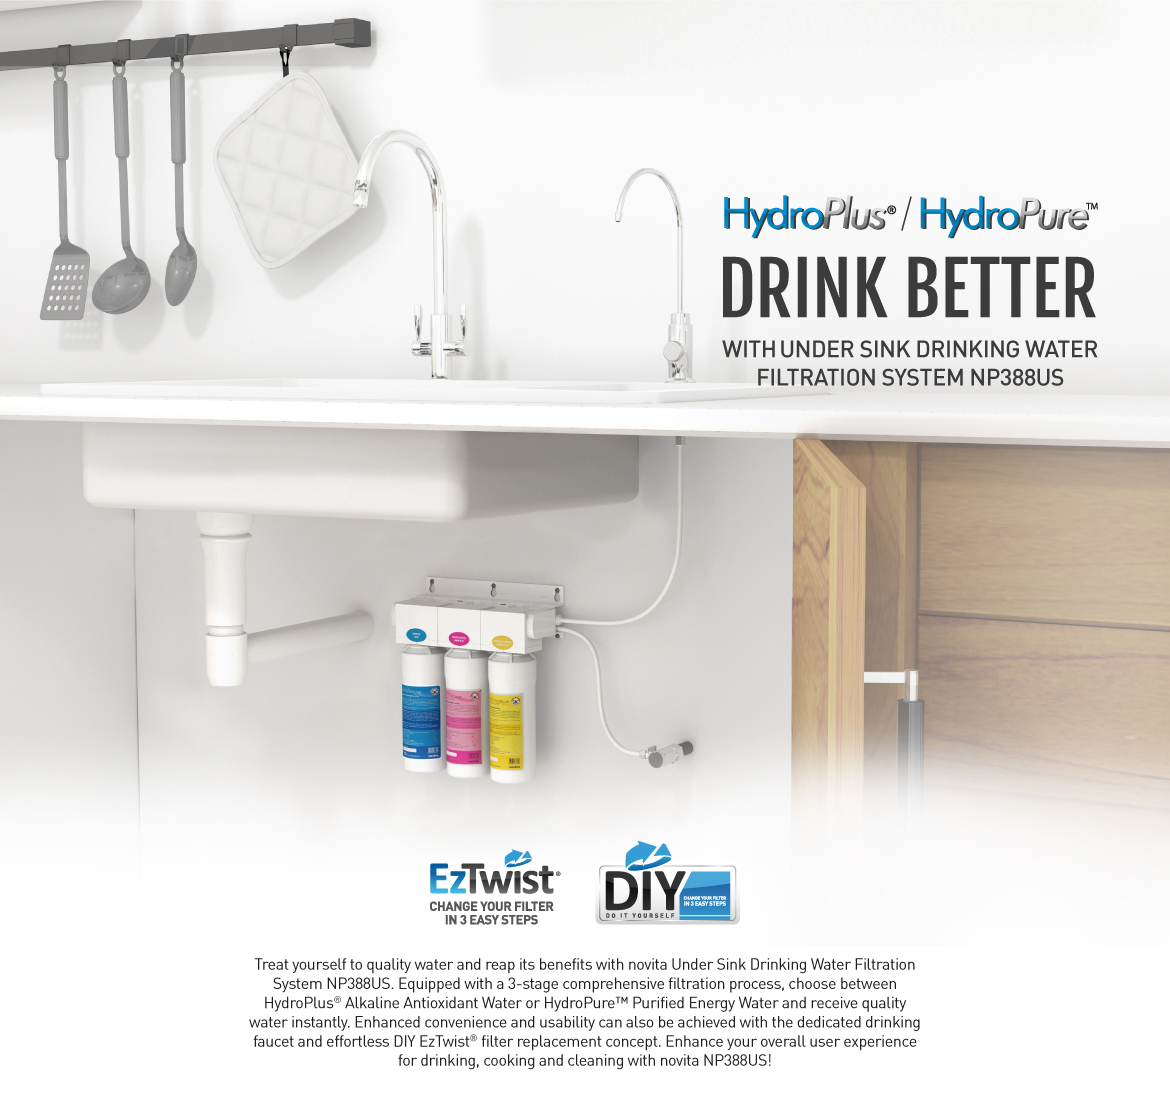 Under Sink Drinking Water Filtration System Np388us